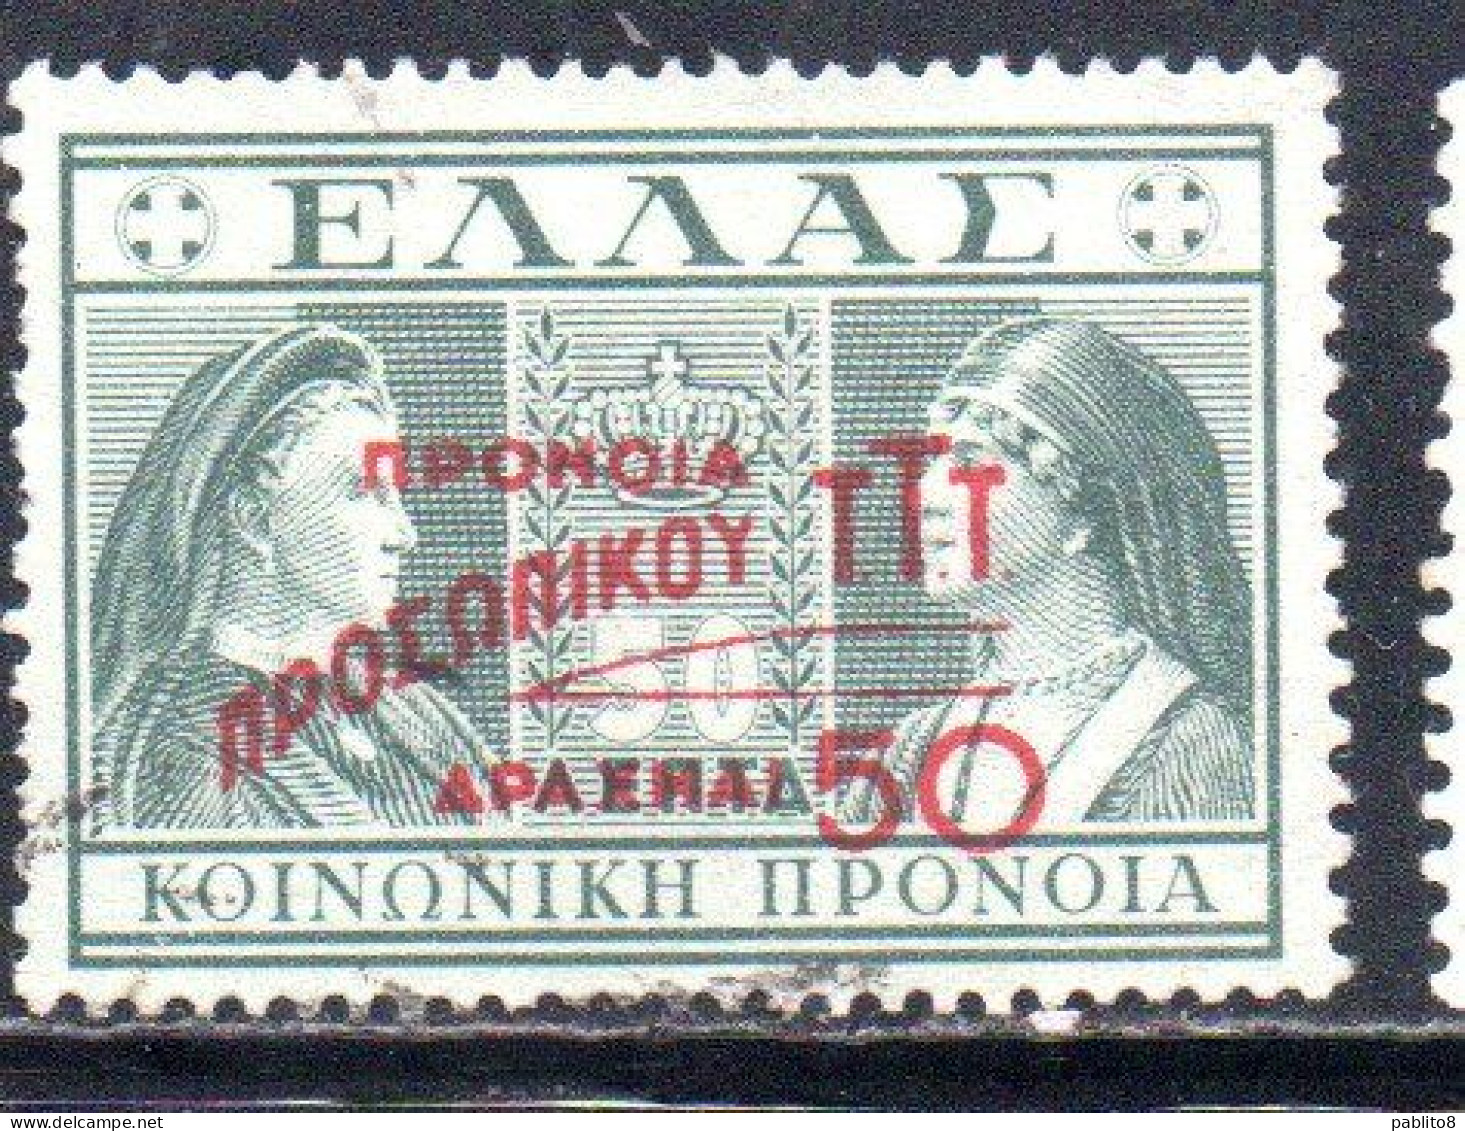 GREECE GRECIA ELLAS 1946 1947 POSTAL TAX STAMPS TUBERCULOSIS SURCHARGED 50d On 50l USED USATO OBLITERE' - Fiscaux